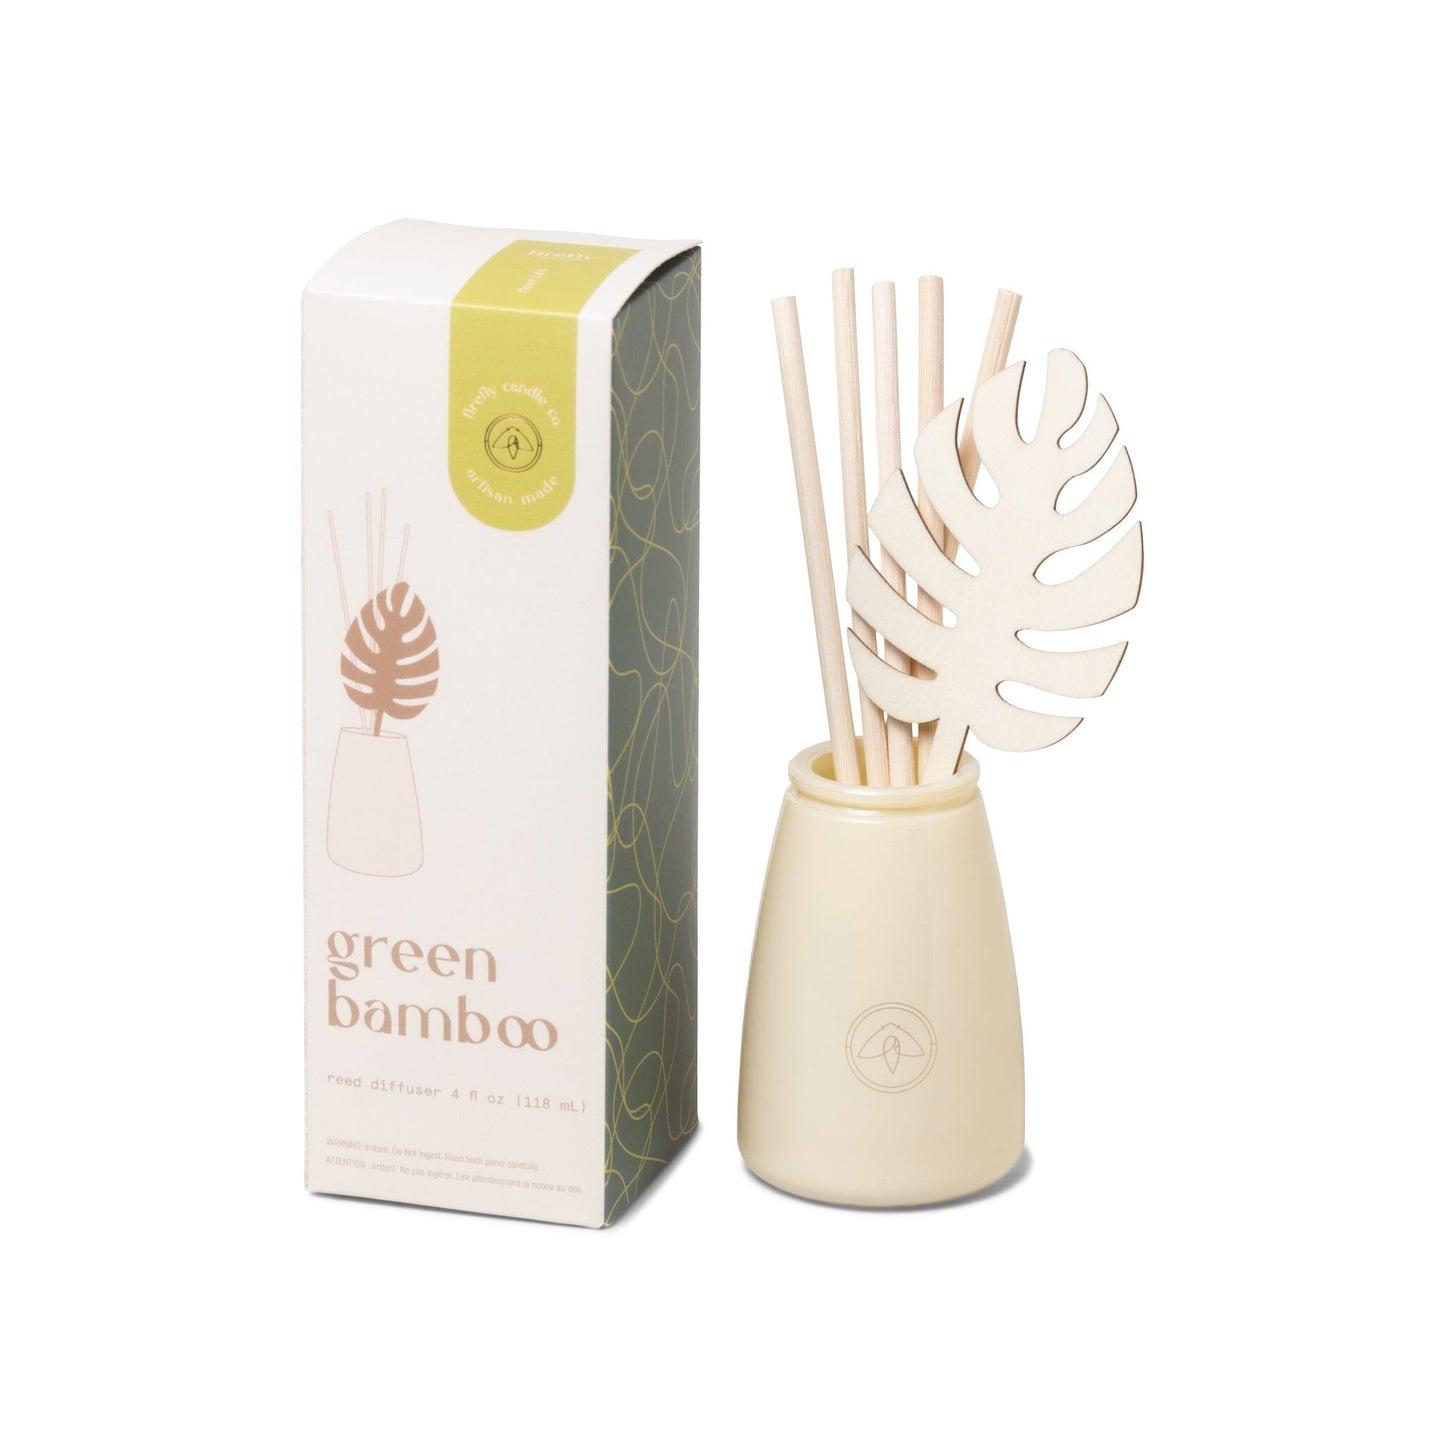 Flourish 4 oz Diffuser - Green Bamboo box and diffuser side by side